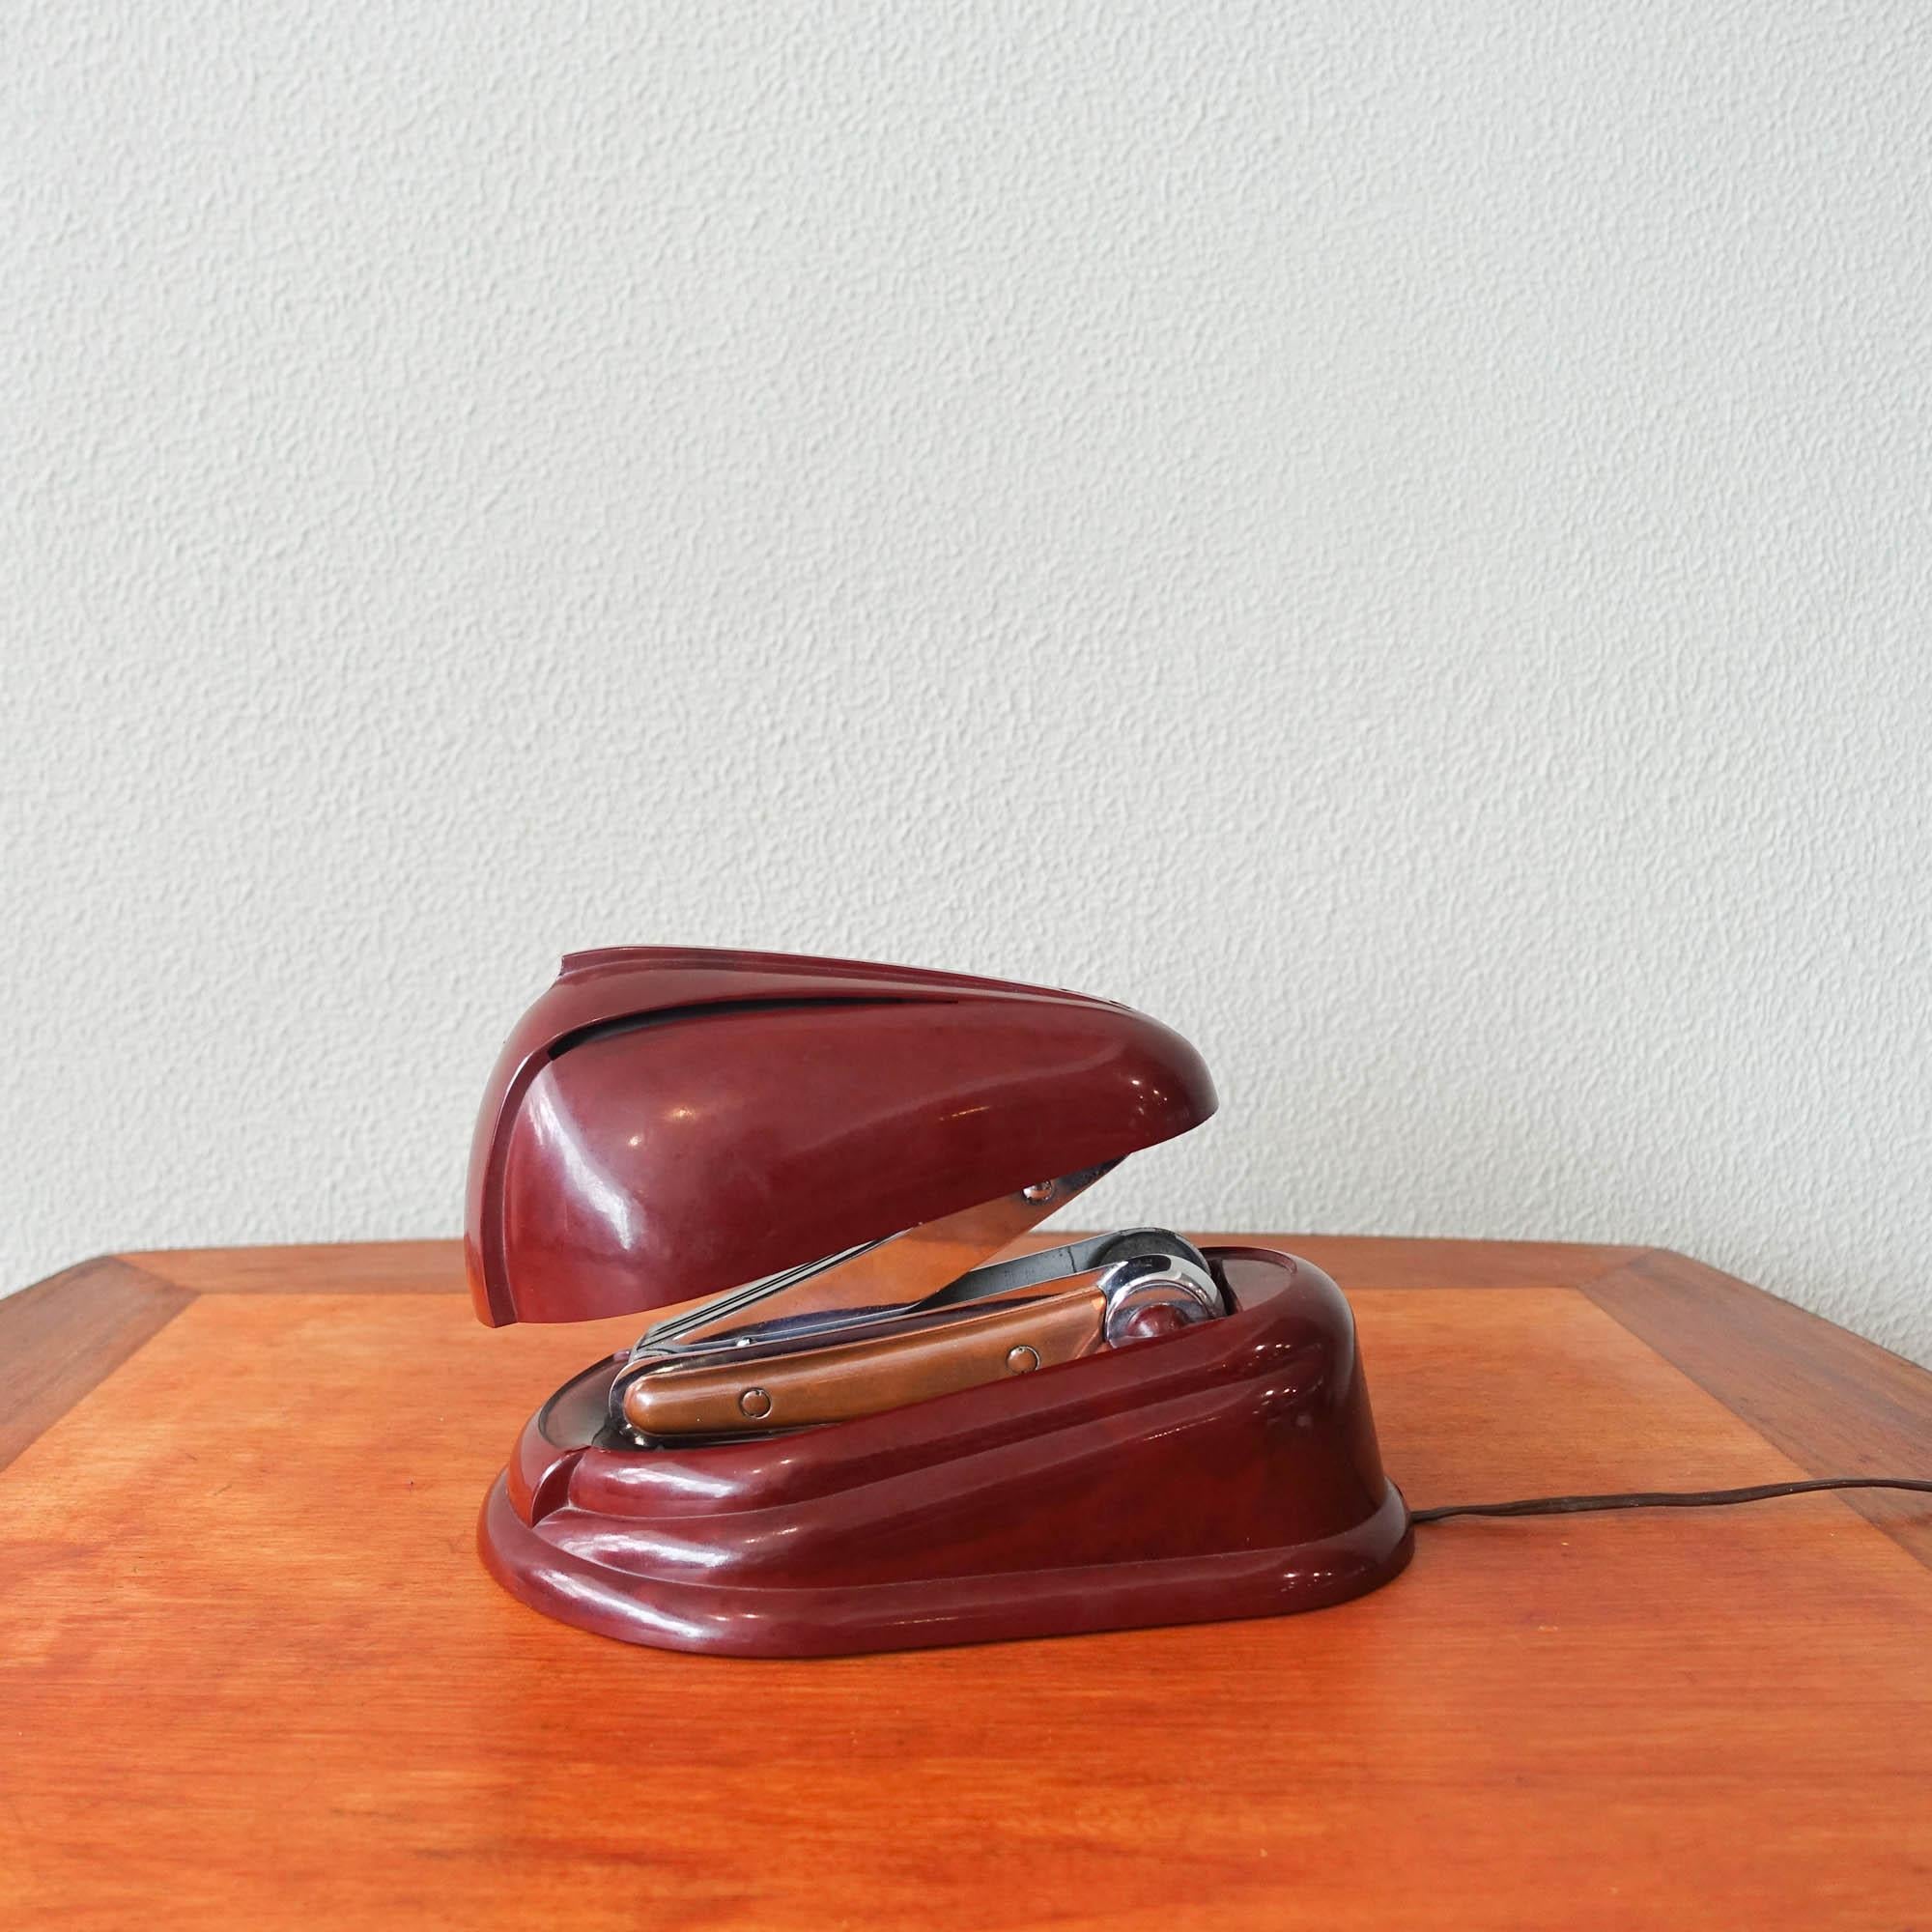 Copper Model Bolide Table Lamp by Jumo Brevete for Jumo, 1940s For Sale